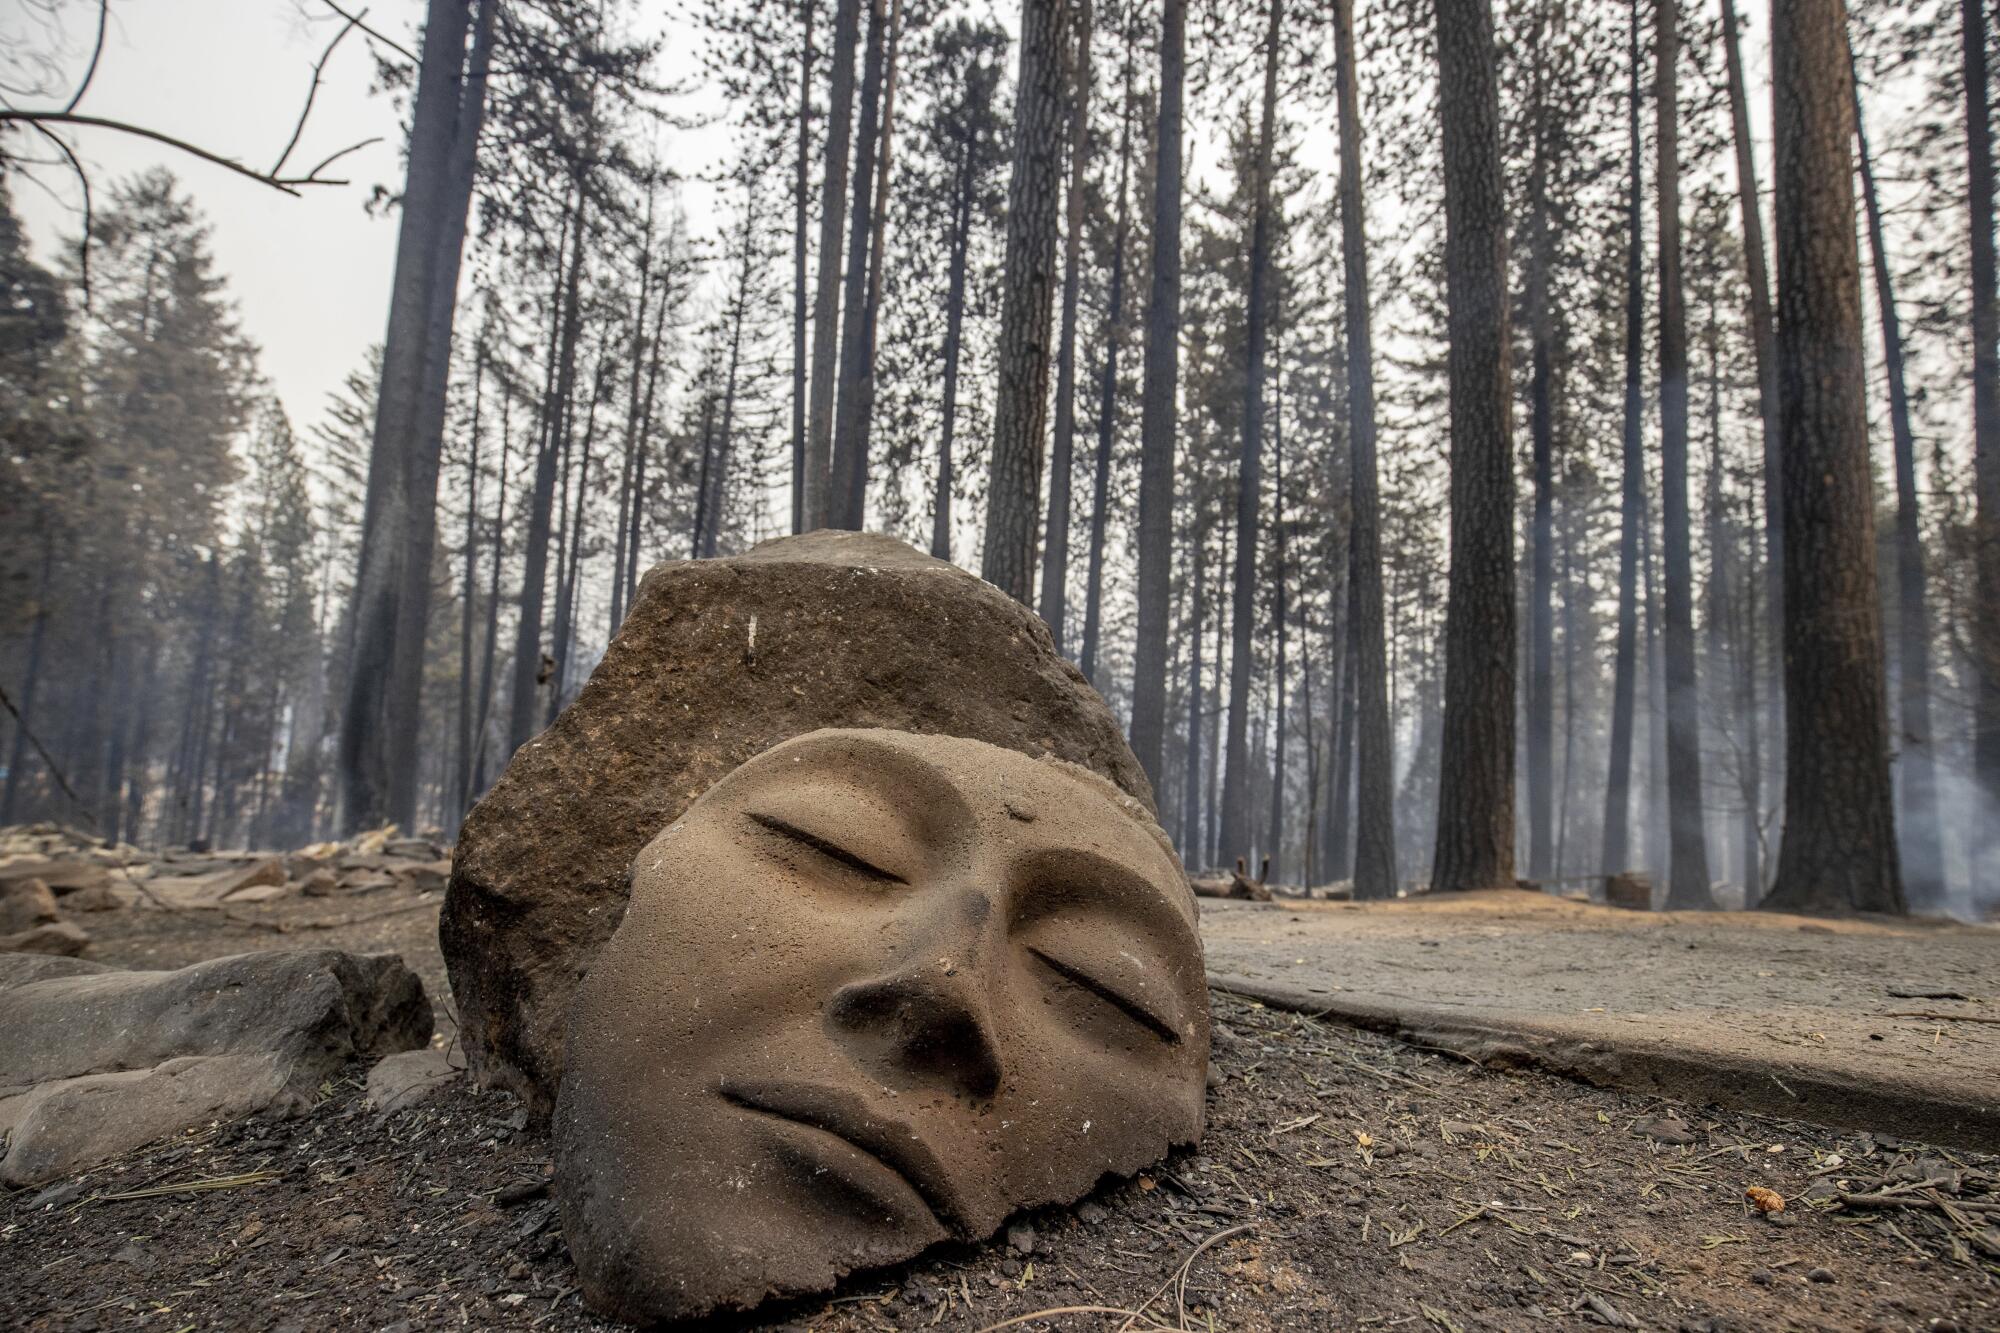 A broken sculpture with a serene face rests in front of burned trees.